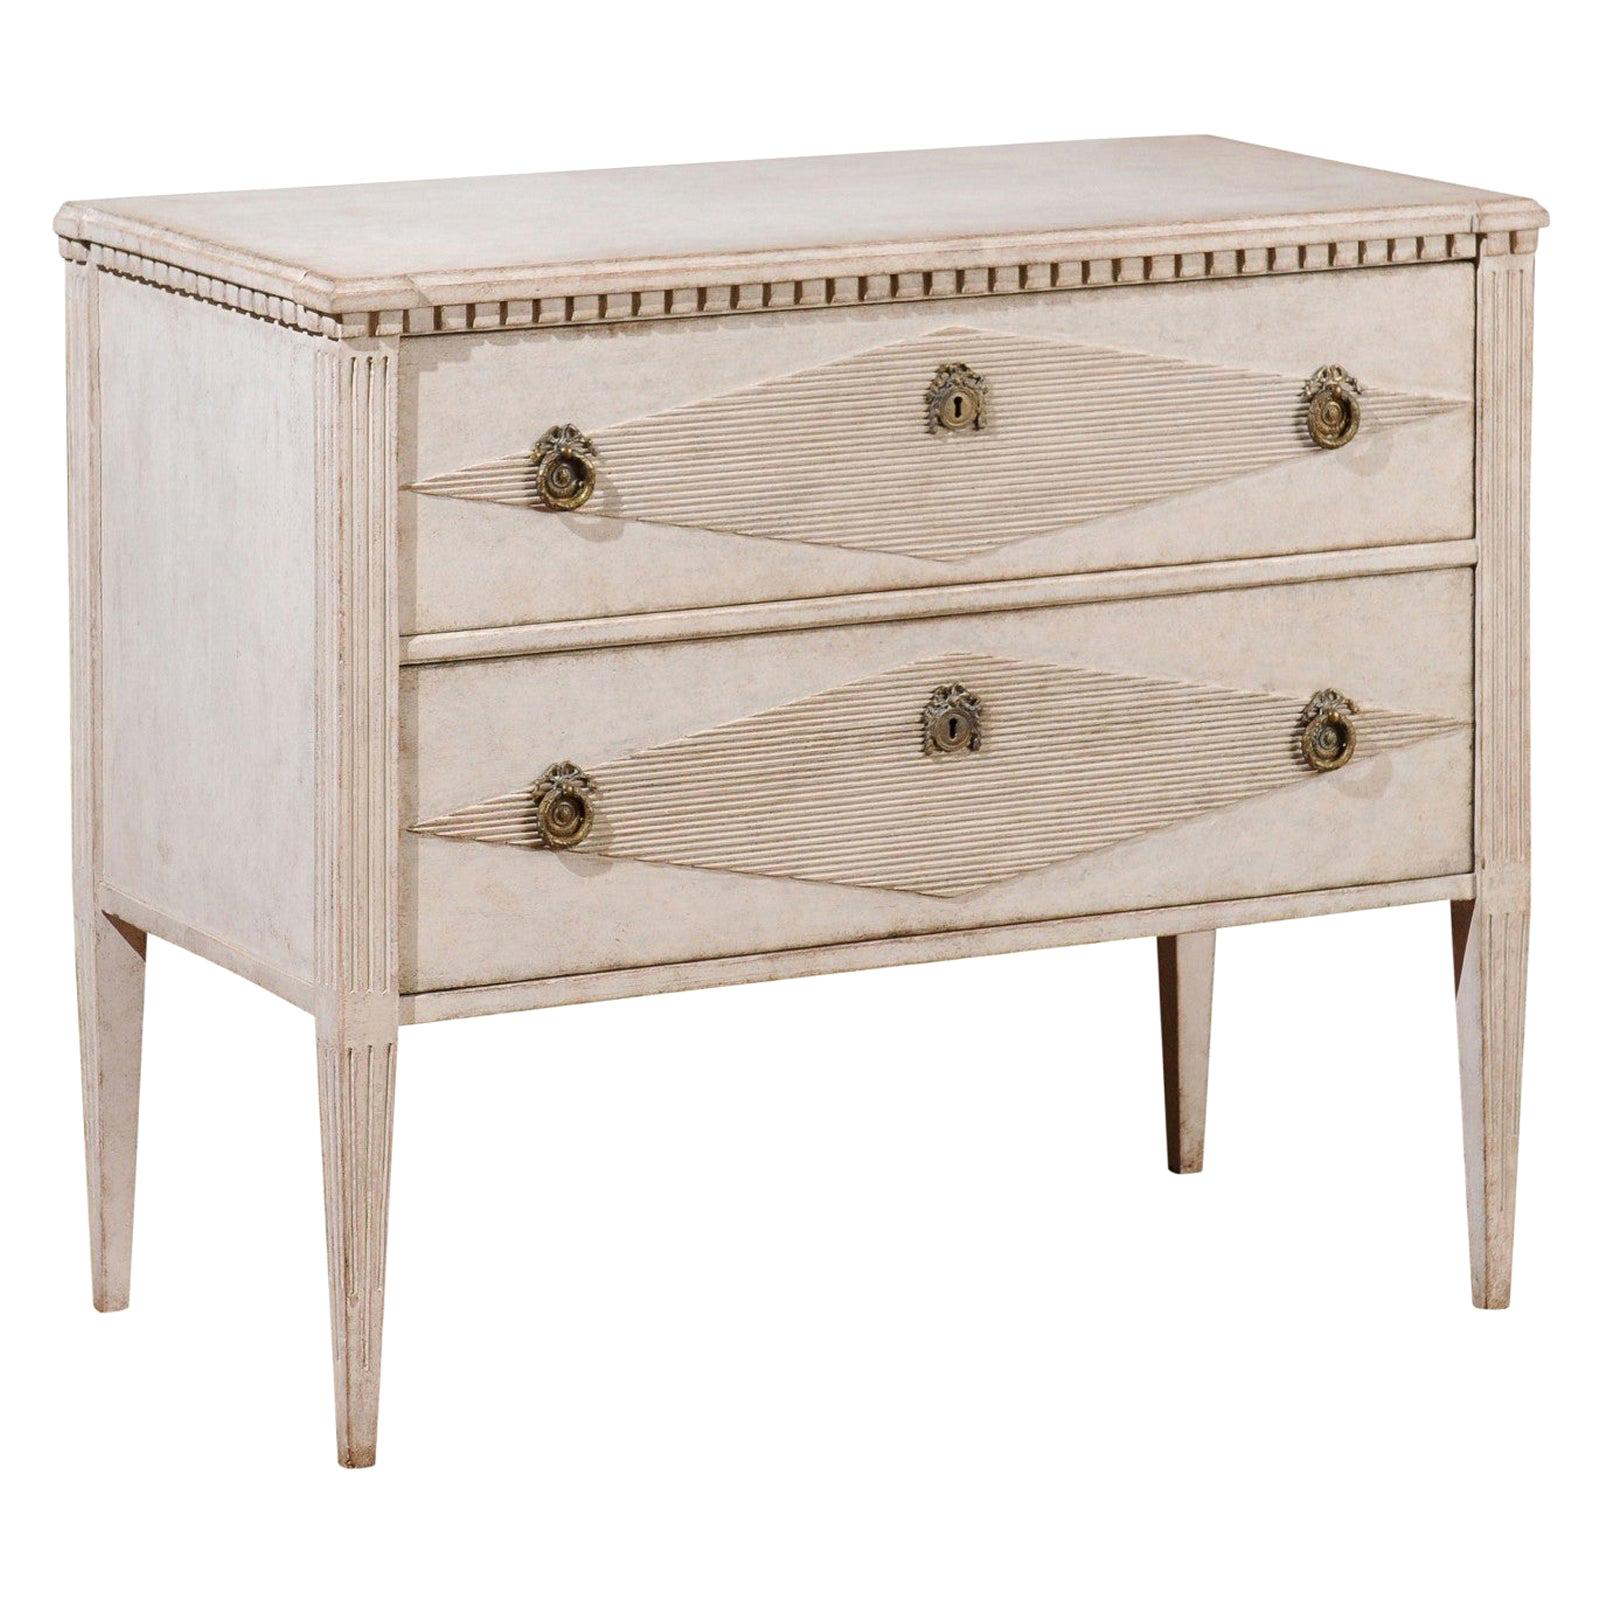 Swedish 19th Century Gustavian Style Painted Wood Chest with Reeded Diamonds